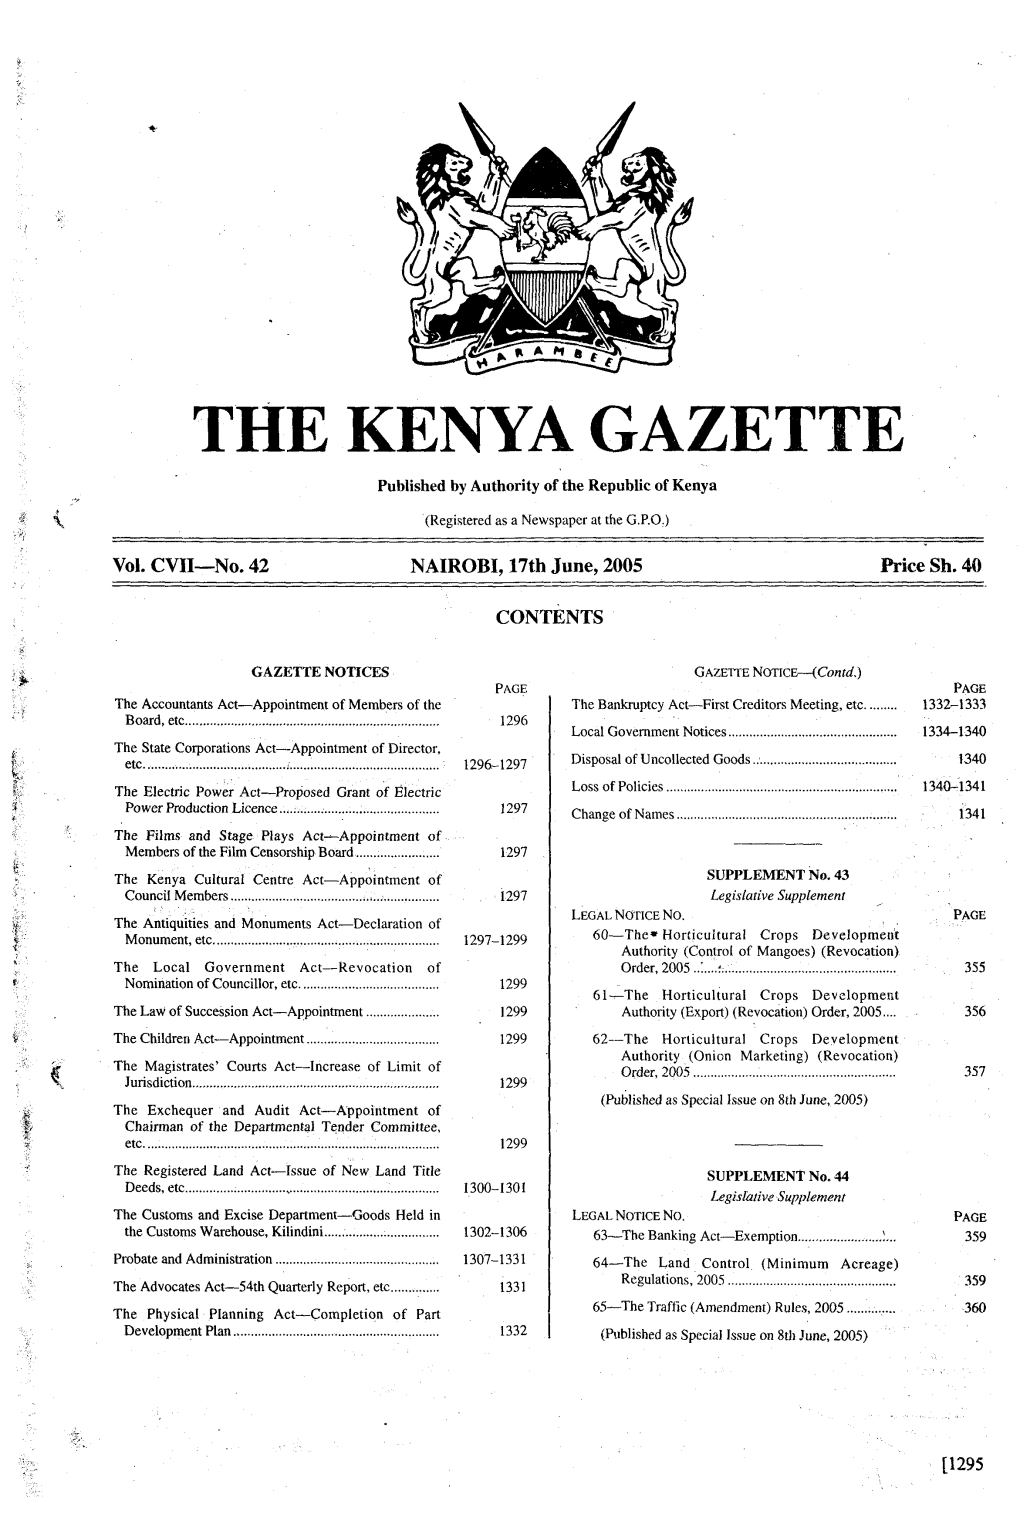 THE KENYA GAZETTE Published by Authority of the Republic of Kenya .R, (Registered As a Newspaper at the G.P.O.)